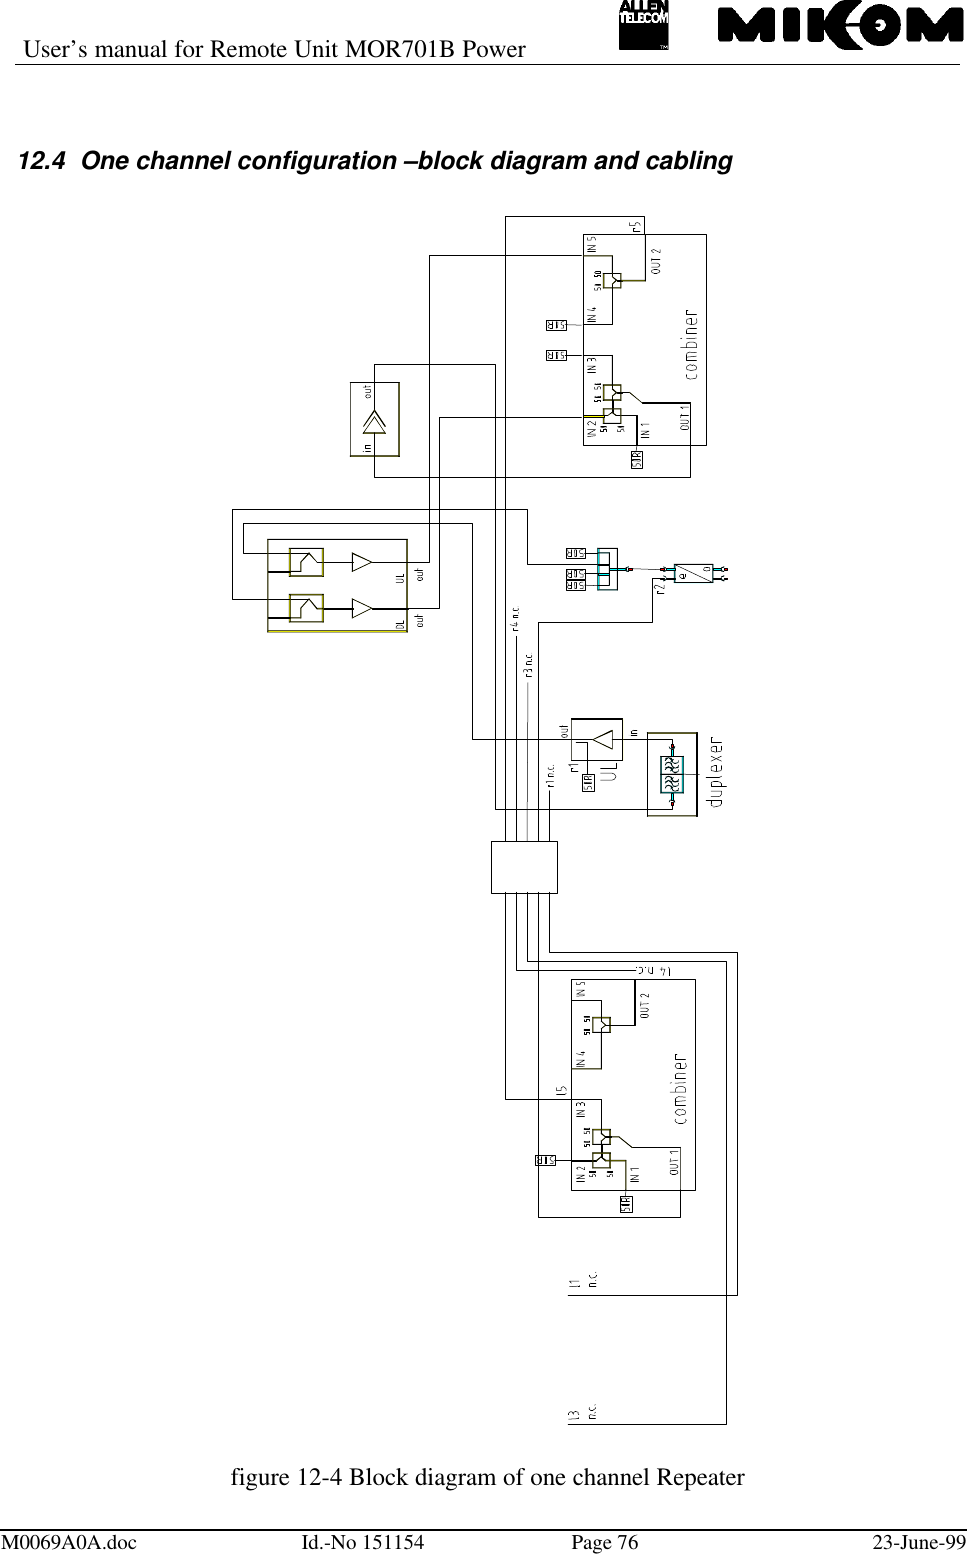 User’s manual for Remote Unit MOR701B PowerM0069A0A.doc Id.-No 151154 Page 76 23-June-9912.4 One channel configuration –block diagram and cablingfigure 12-4 Block diagram of one channel Repeater